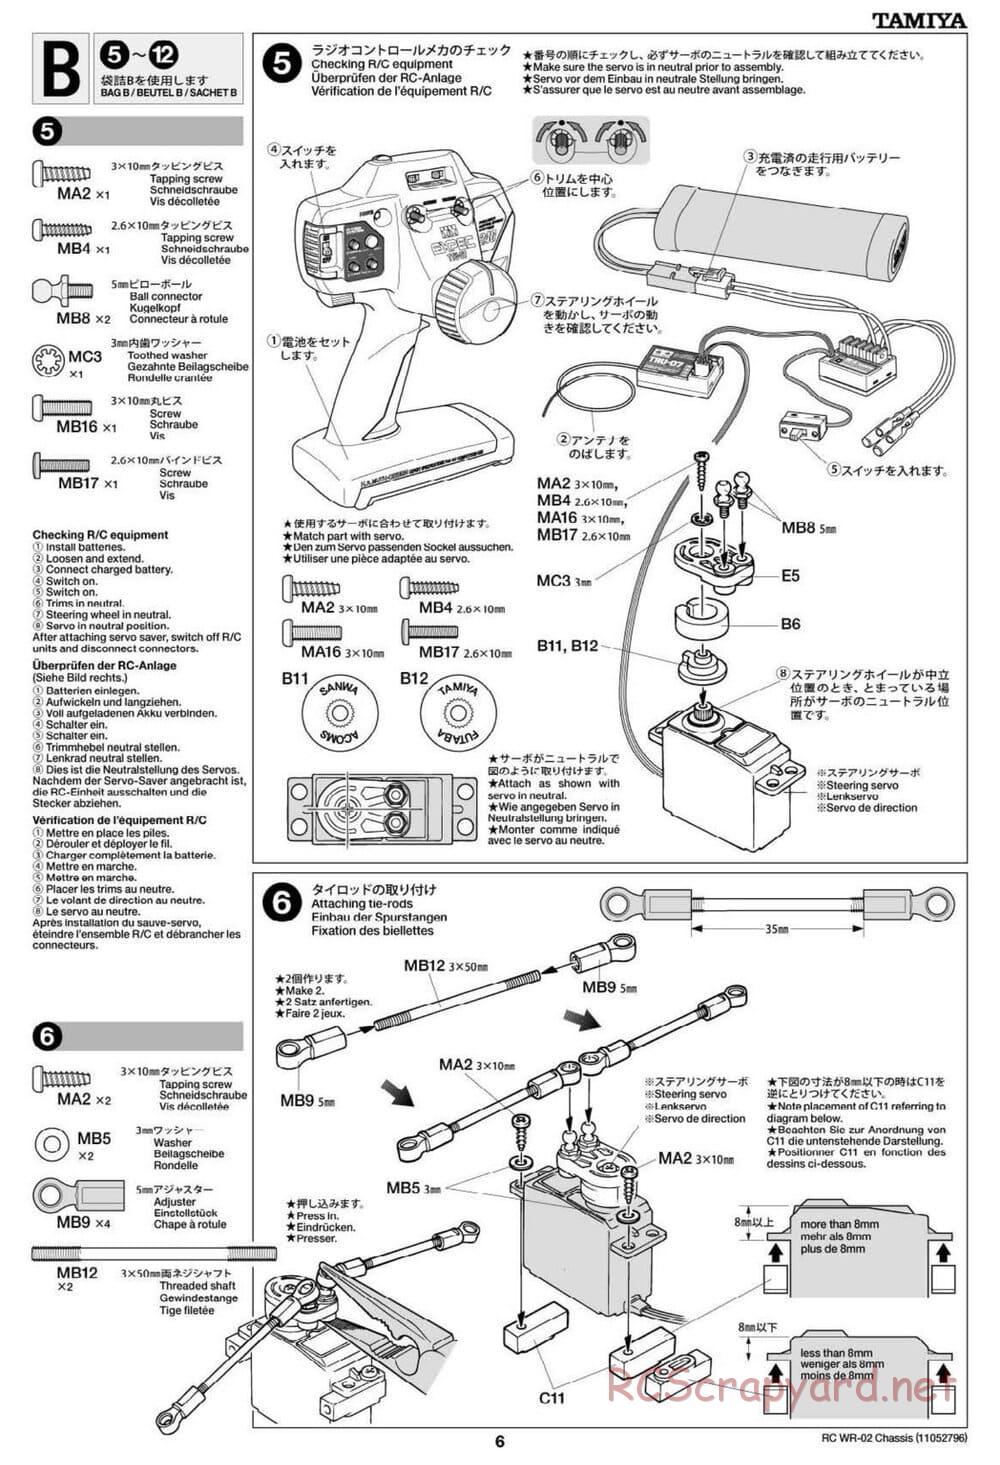 Tamiya - VW Type 2 Wheelie (T1) - WR-02 Chassis - Manual - Page 6